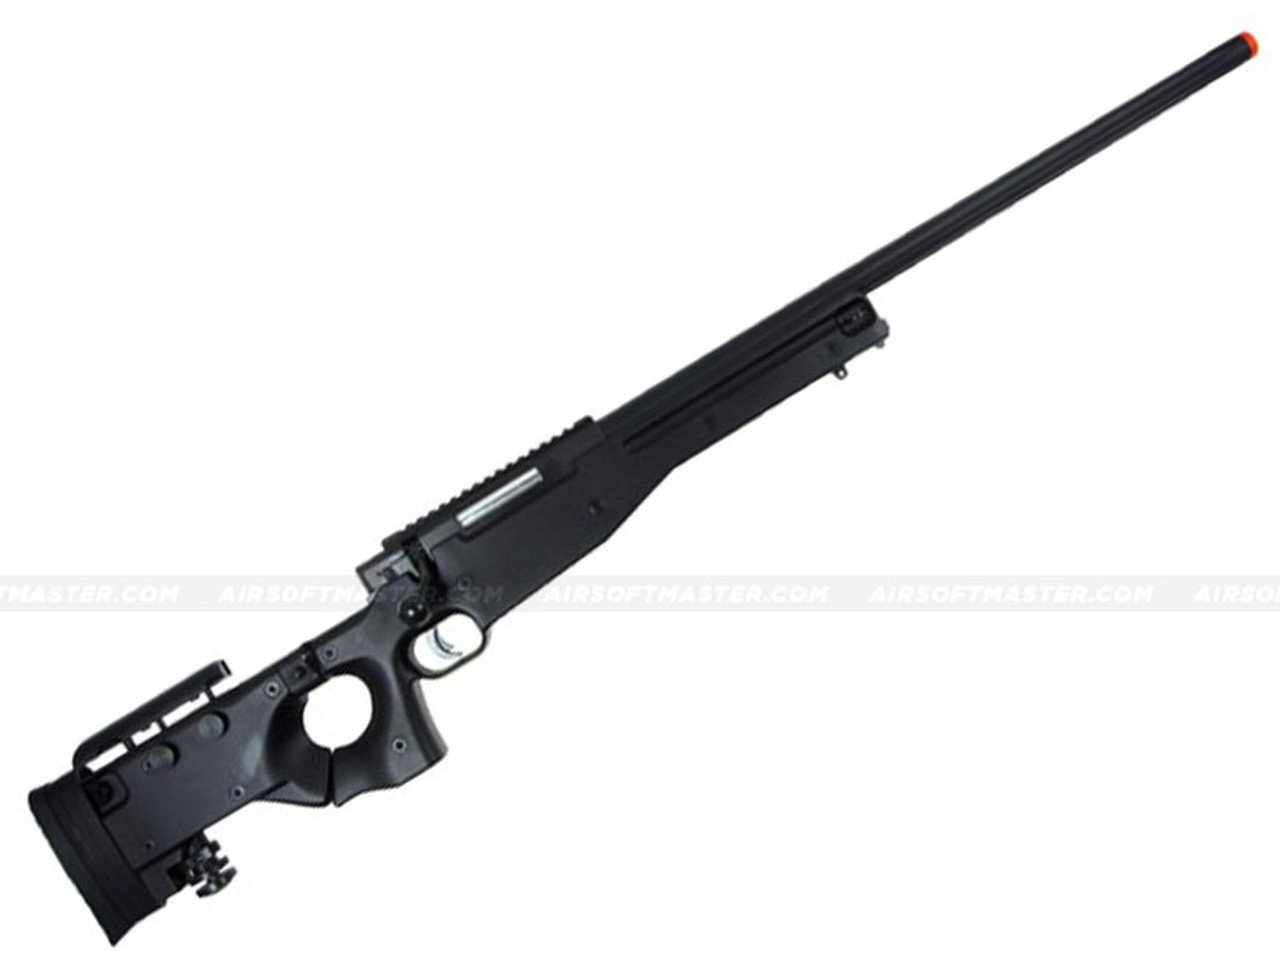 WELL L96 Bolt Action Airsoft Sniper Rifle w/ Folding Stock Black